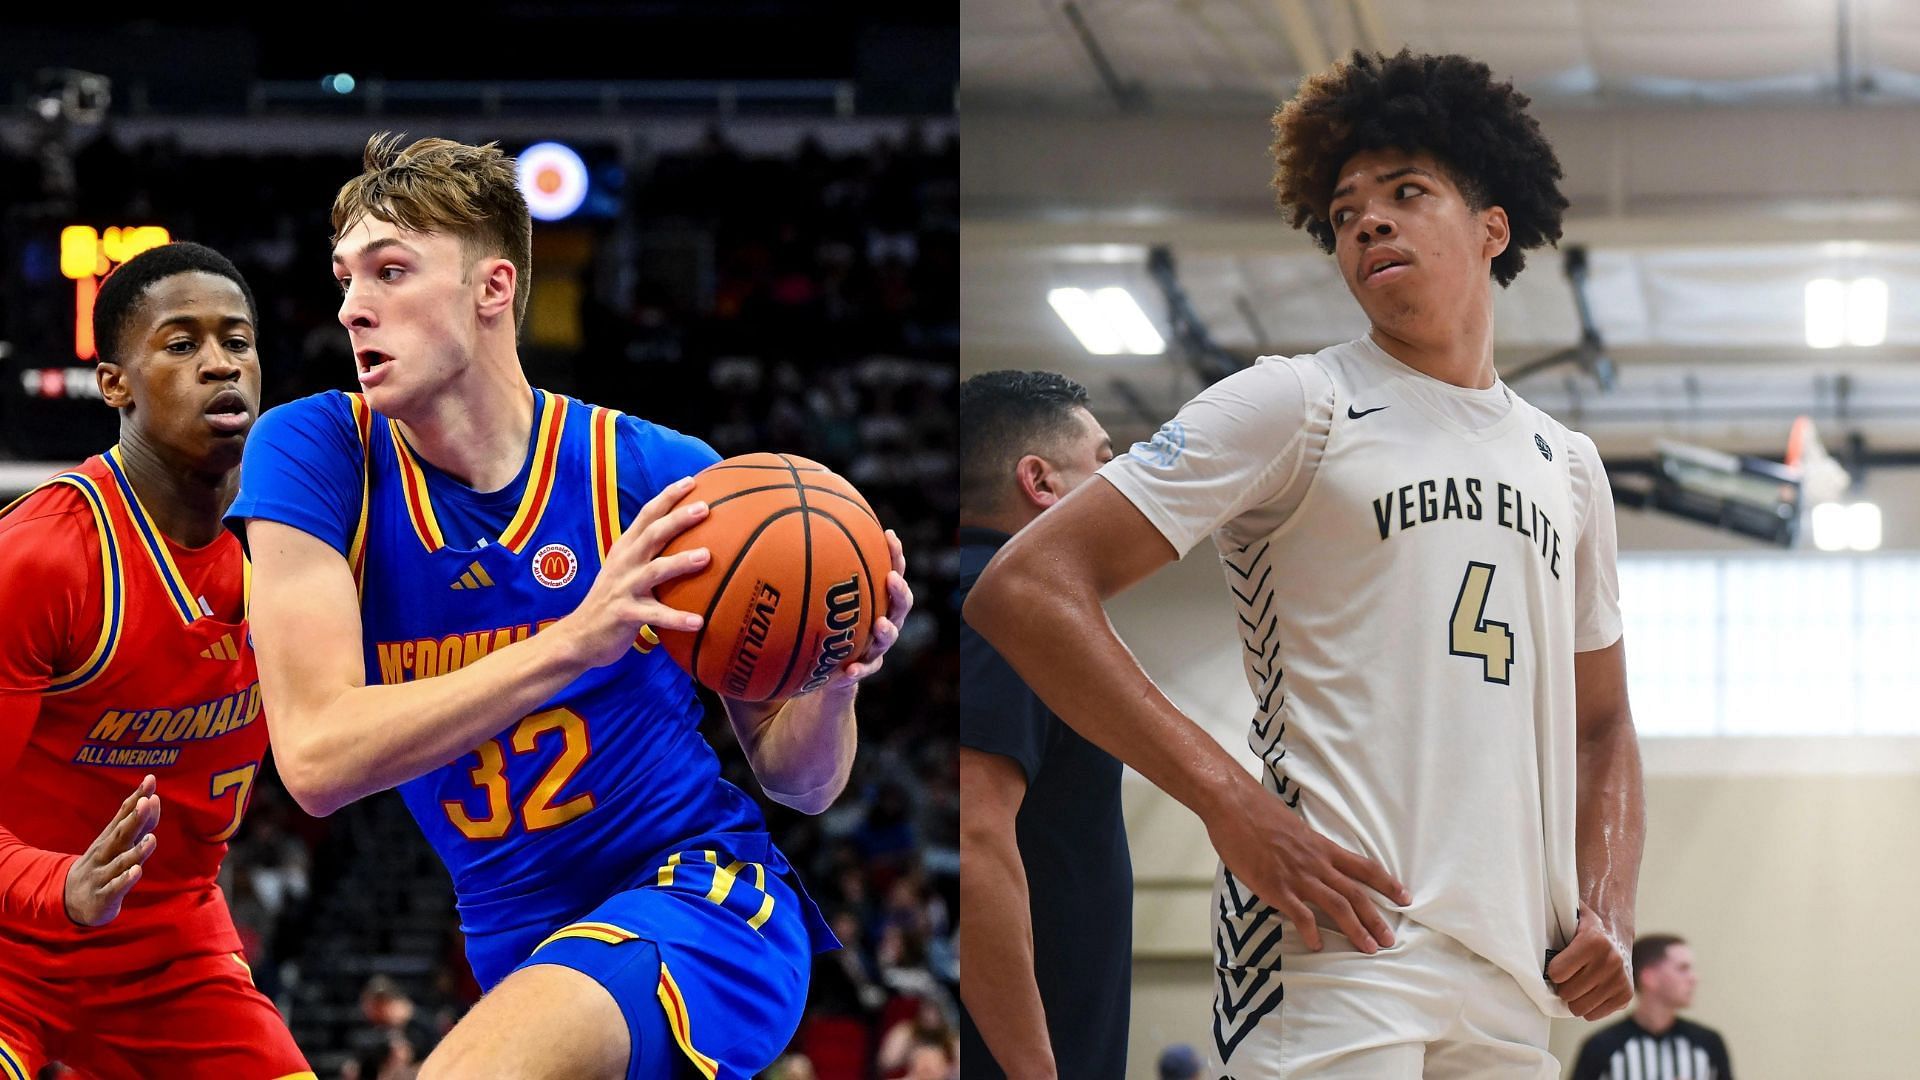 Cooper Flagg and Tyran Stokes are among the top college basketball recruits 